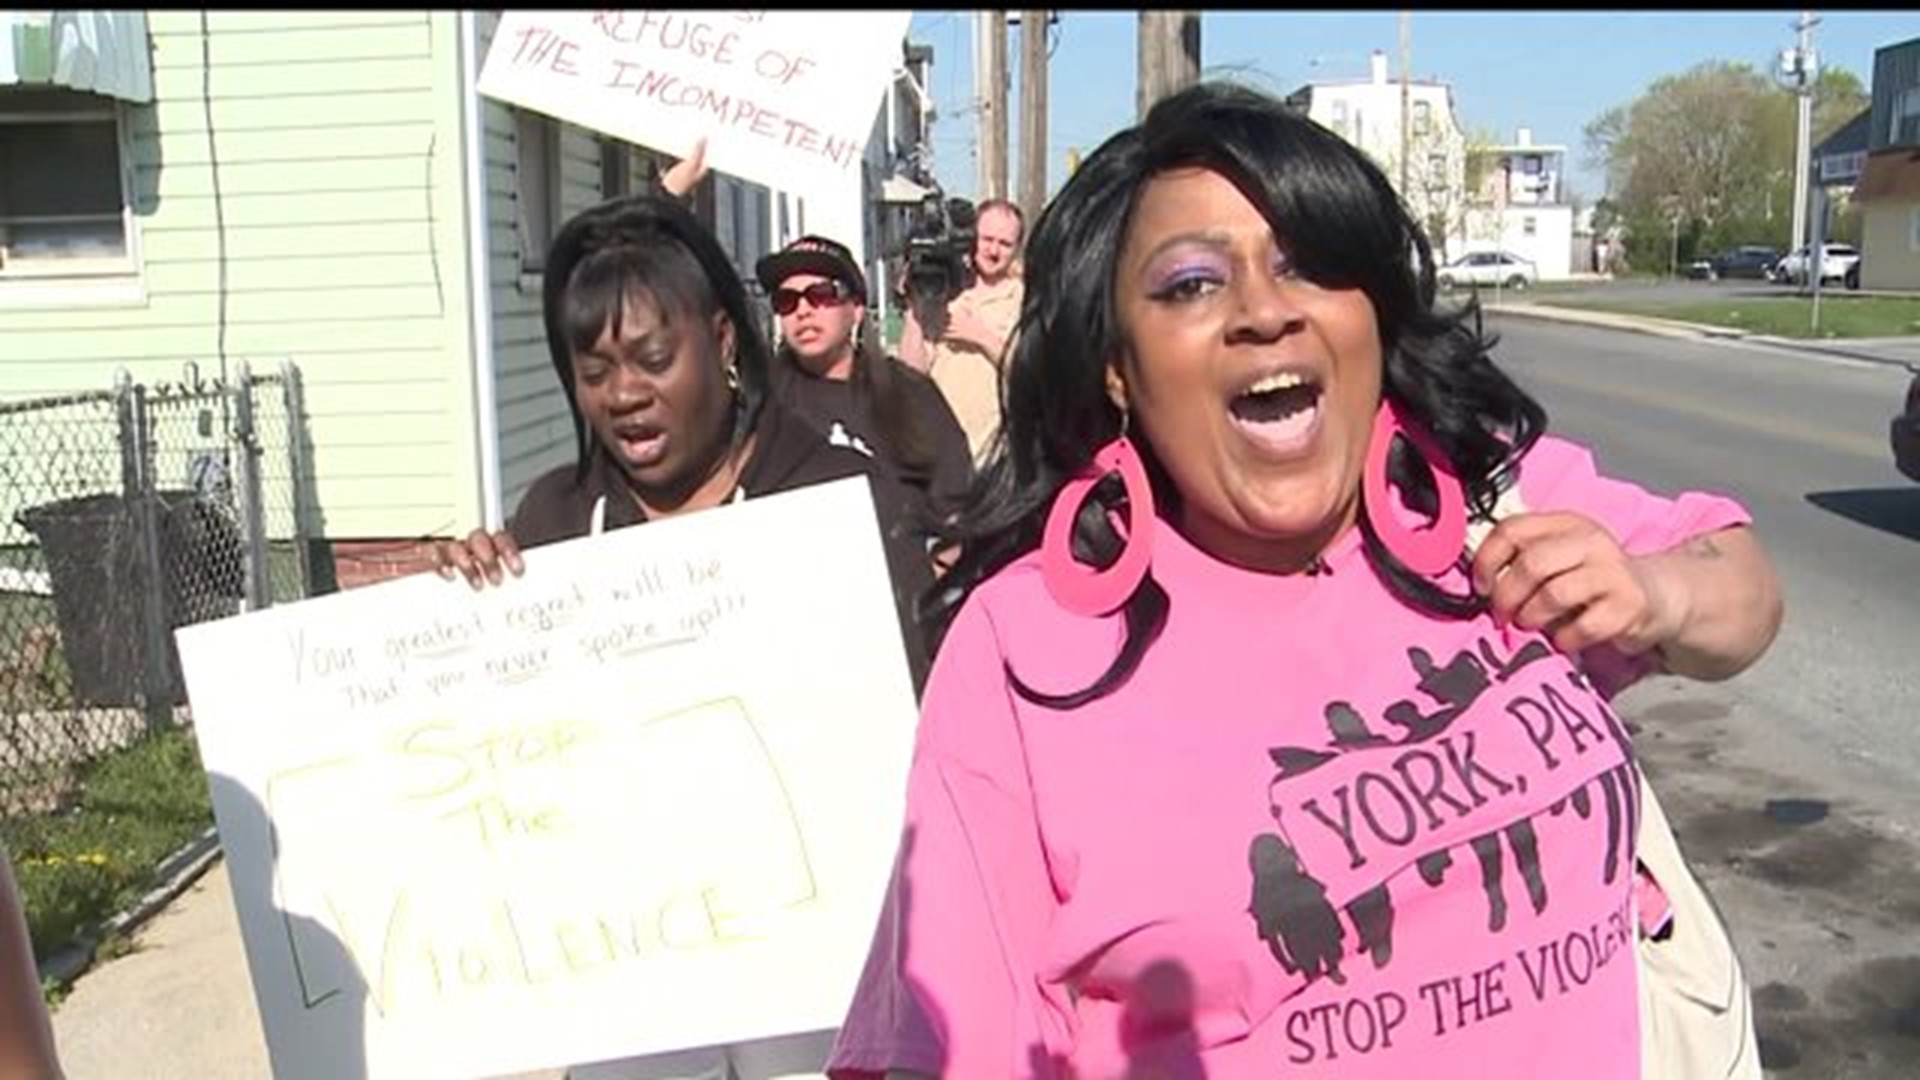 York city residents rally against violence